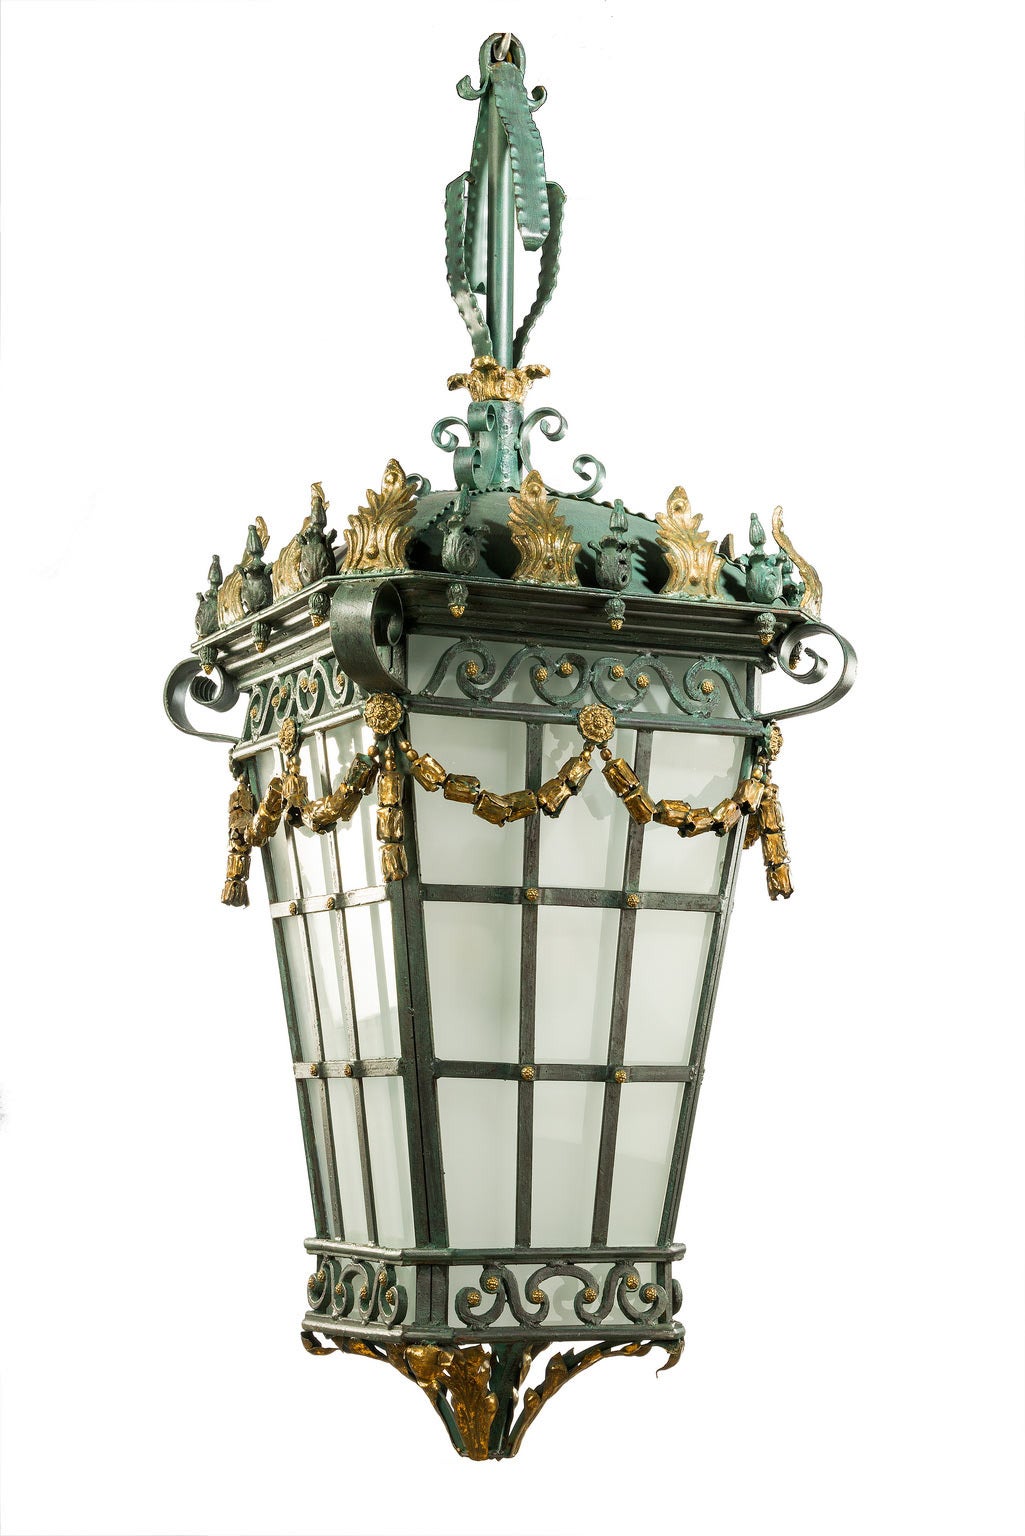 A massive patinated bronze lantern, the upper framework with scrolls and swags and flared leaf decoration.

RR.